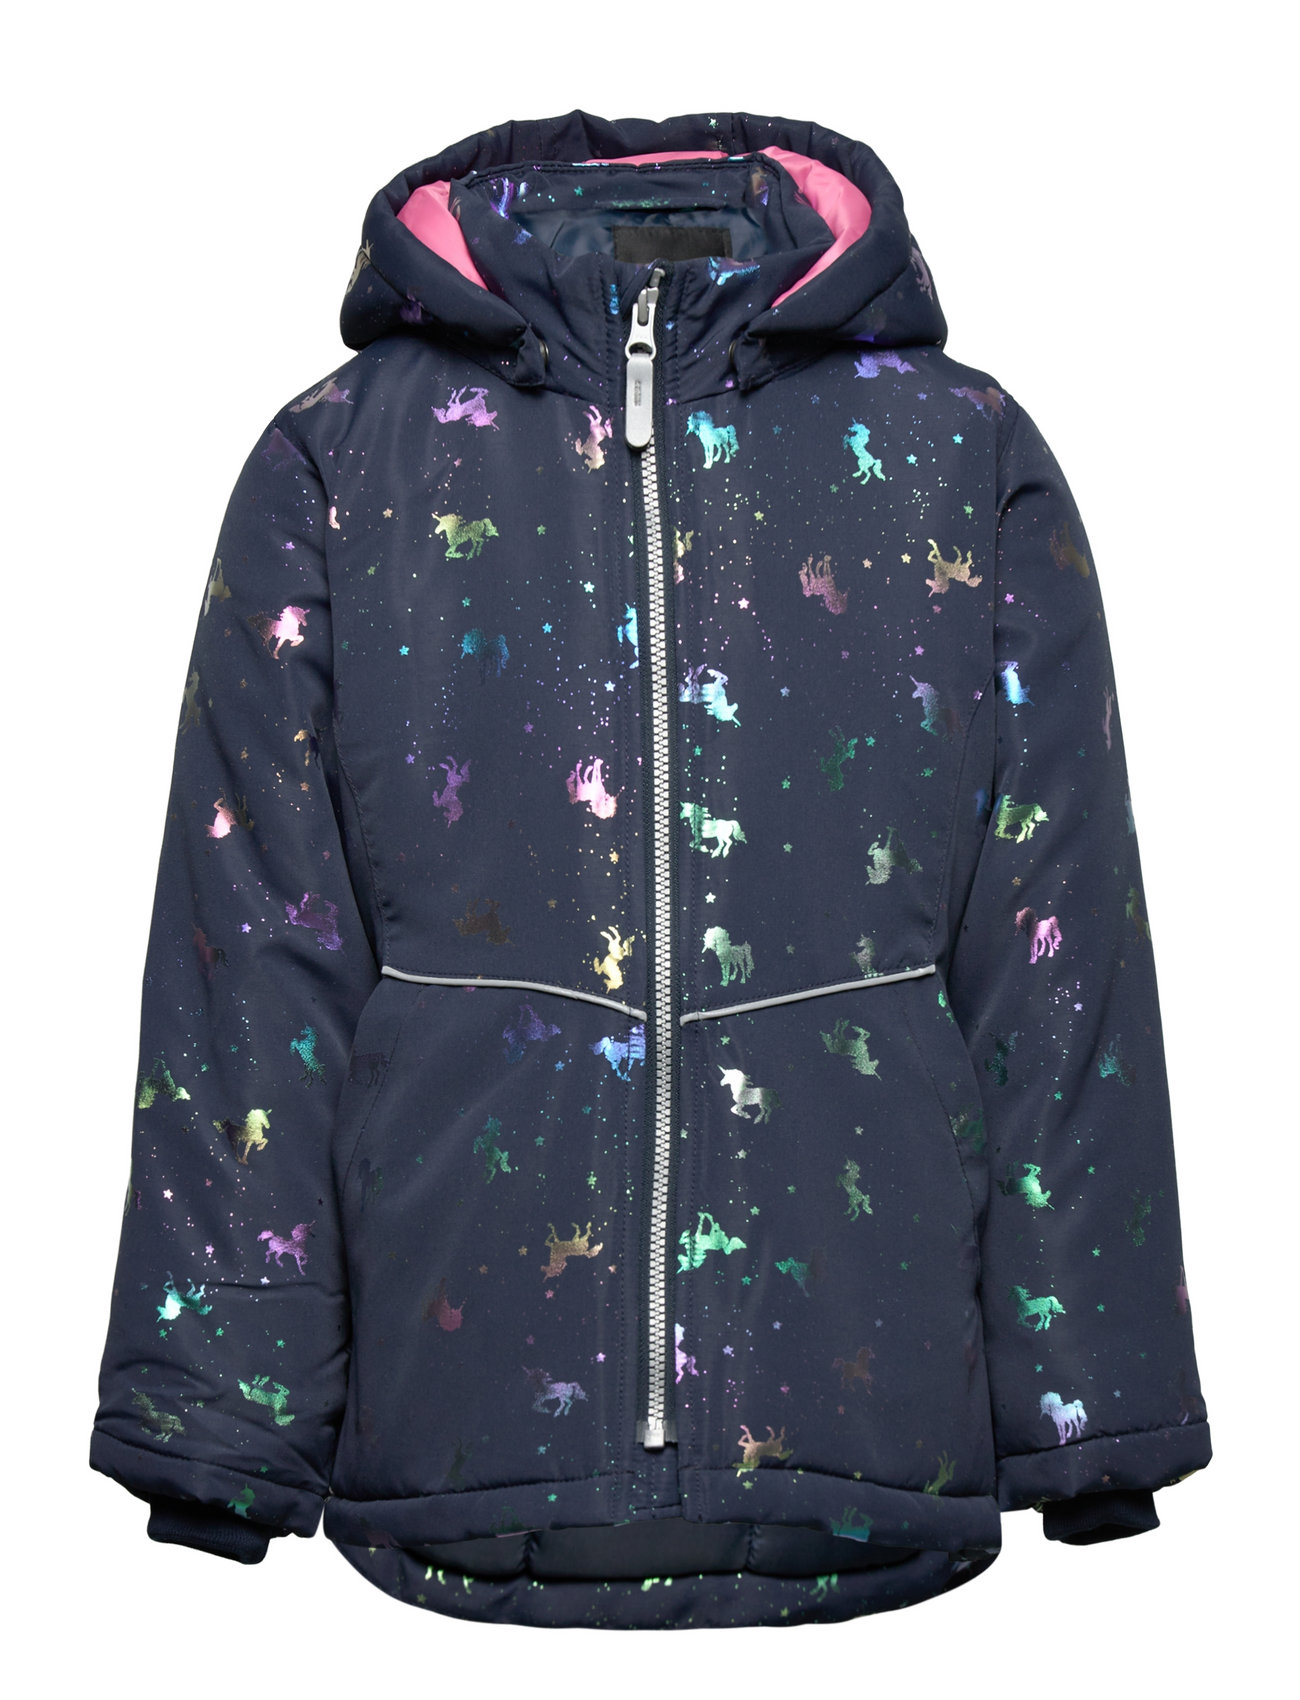 name it Nmfmaxi Jacket Foil Aop Noos - 23.99 €. Buy Parkas from name it  online at Boozt.com. Fast delivery and easy returns